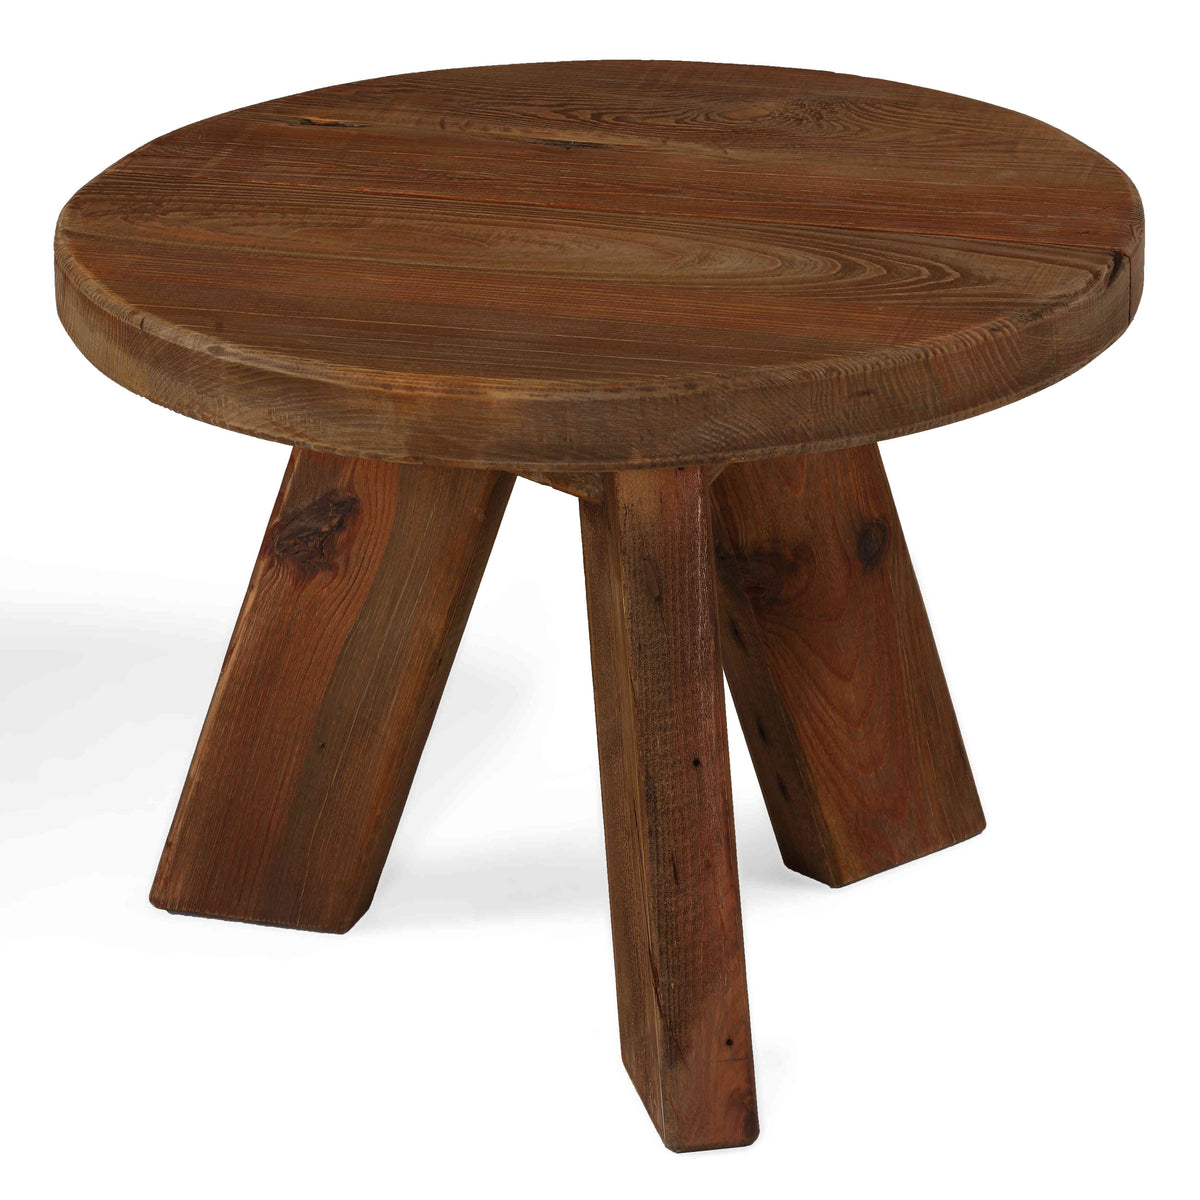 Bare Decor Weston Small Round End Table in Reclaimed Wood